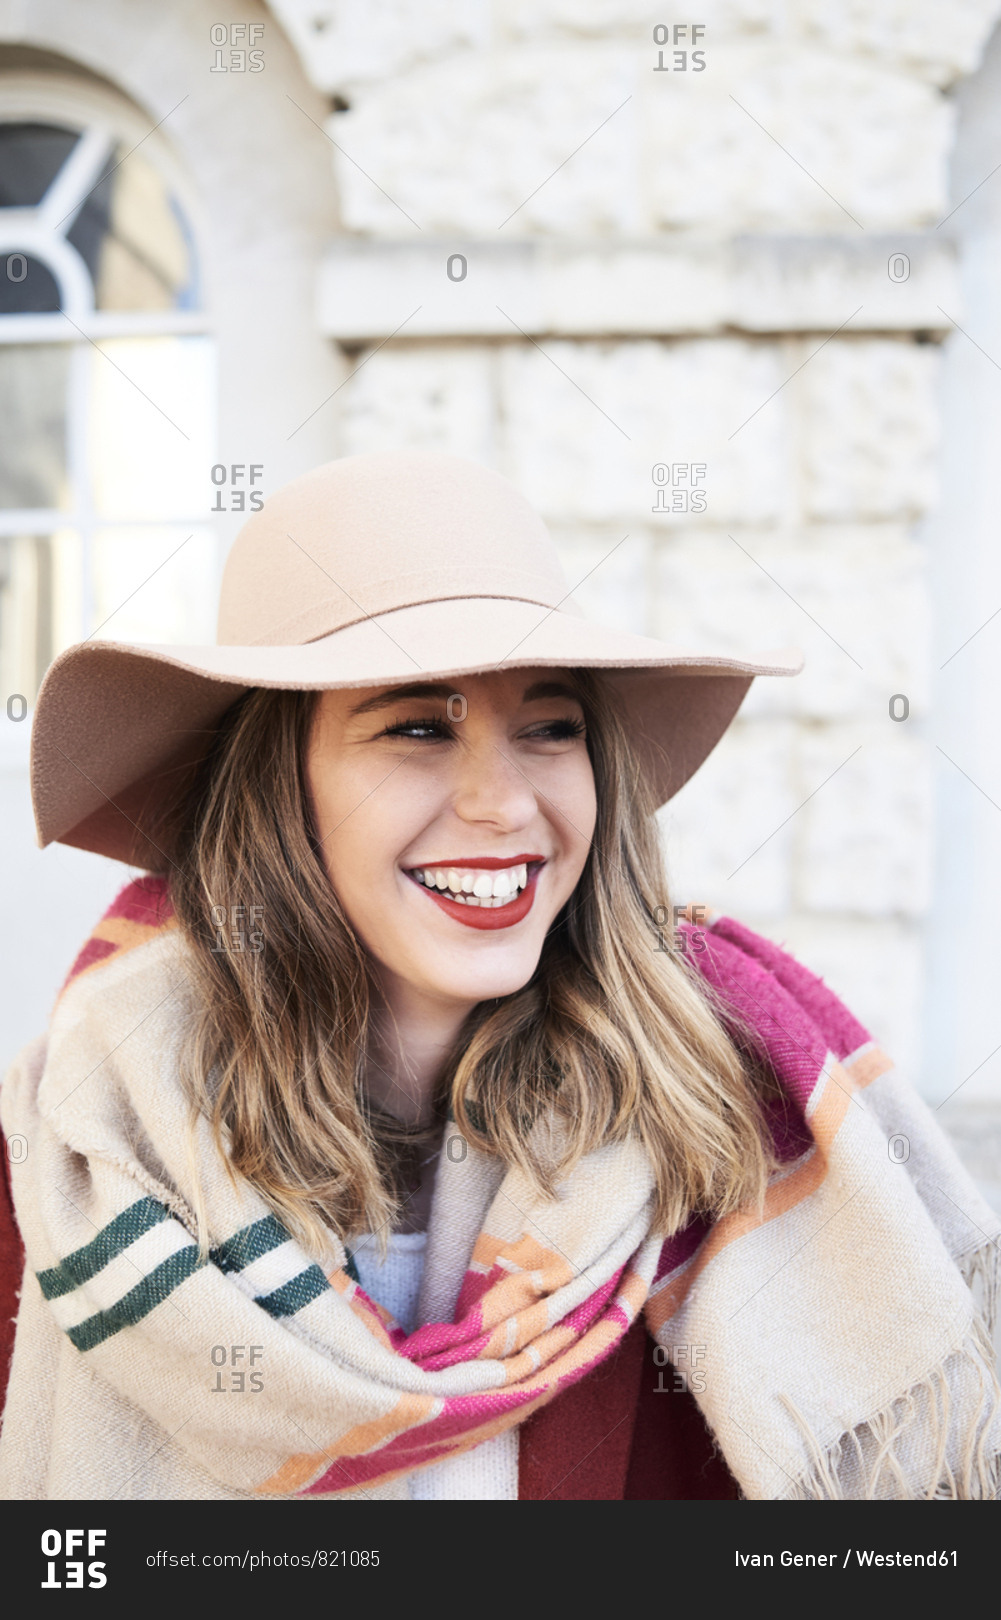 Portrait of a smiling stylish woman wearing a floppy hat